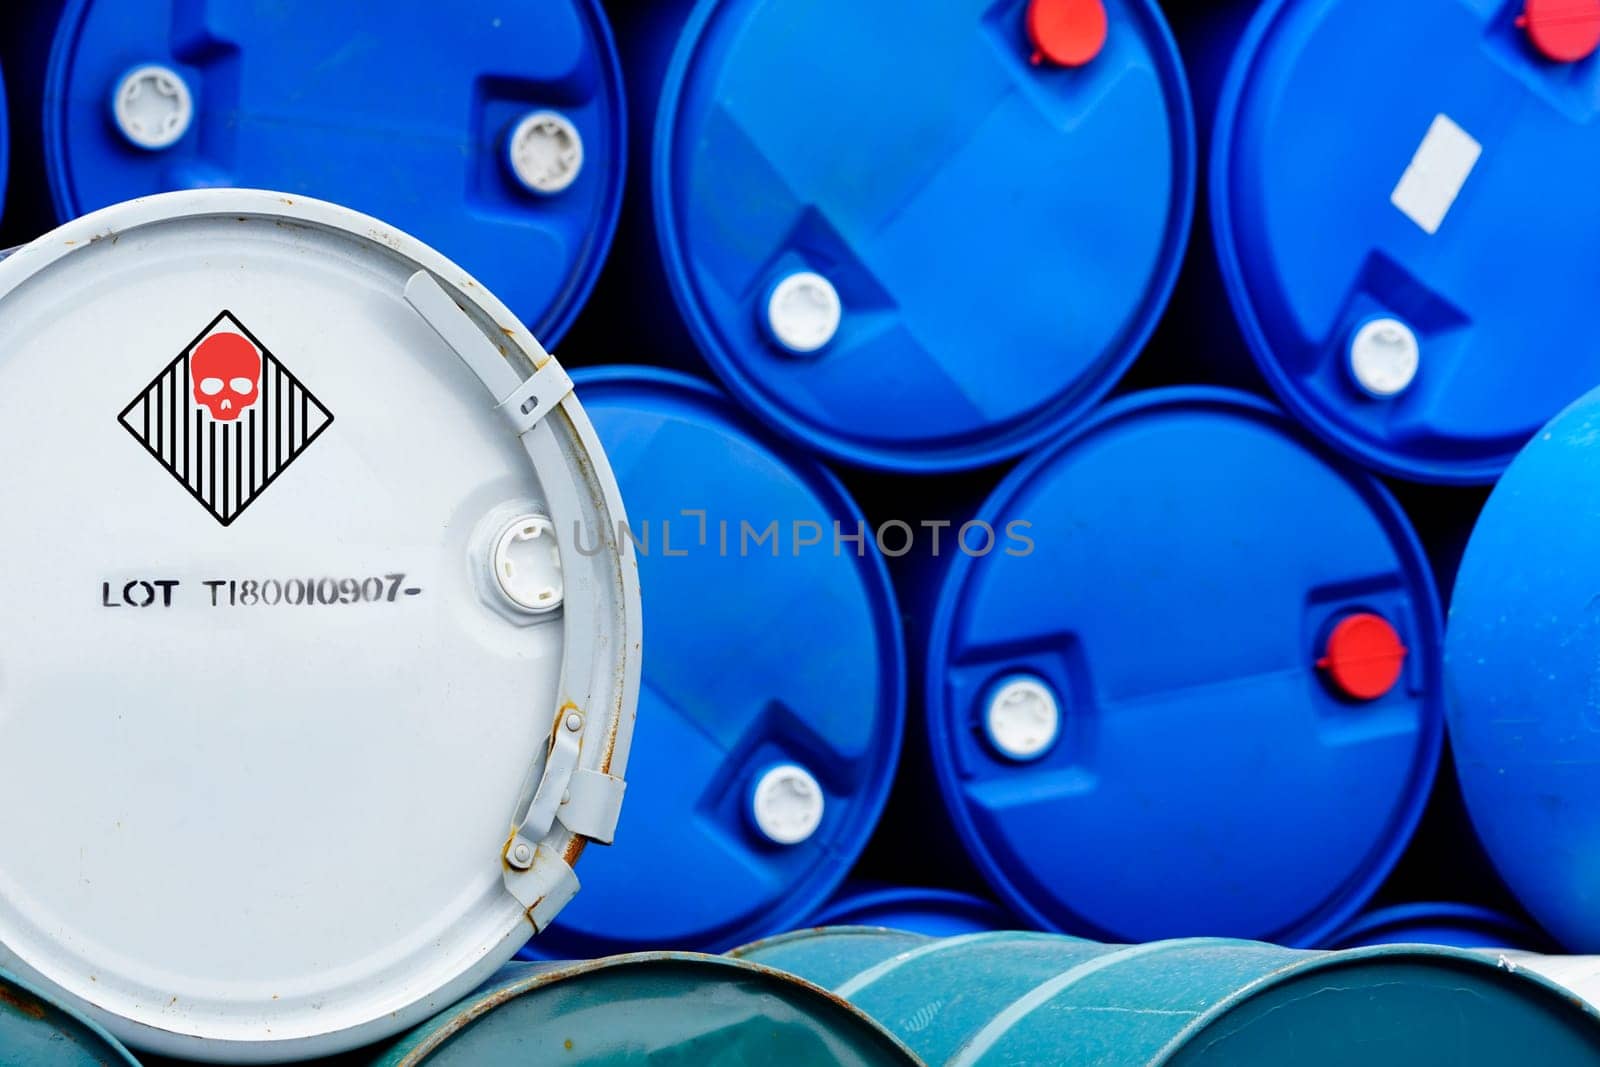 Old chemical barrels. Blue and green oil drum. Steel and plastic oil tank. Toxic waste warehouse. Hazard chemical barrel with warning label. Industrial waste in drum. Hazard waste storage in factory. by Fahroni